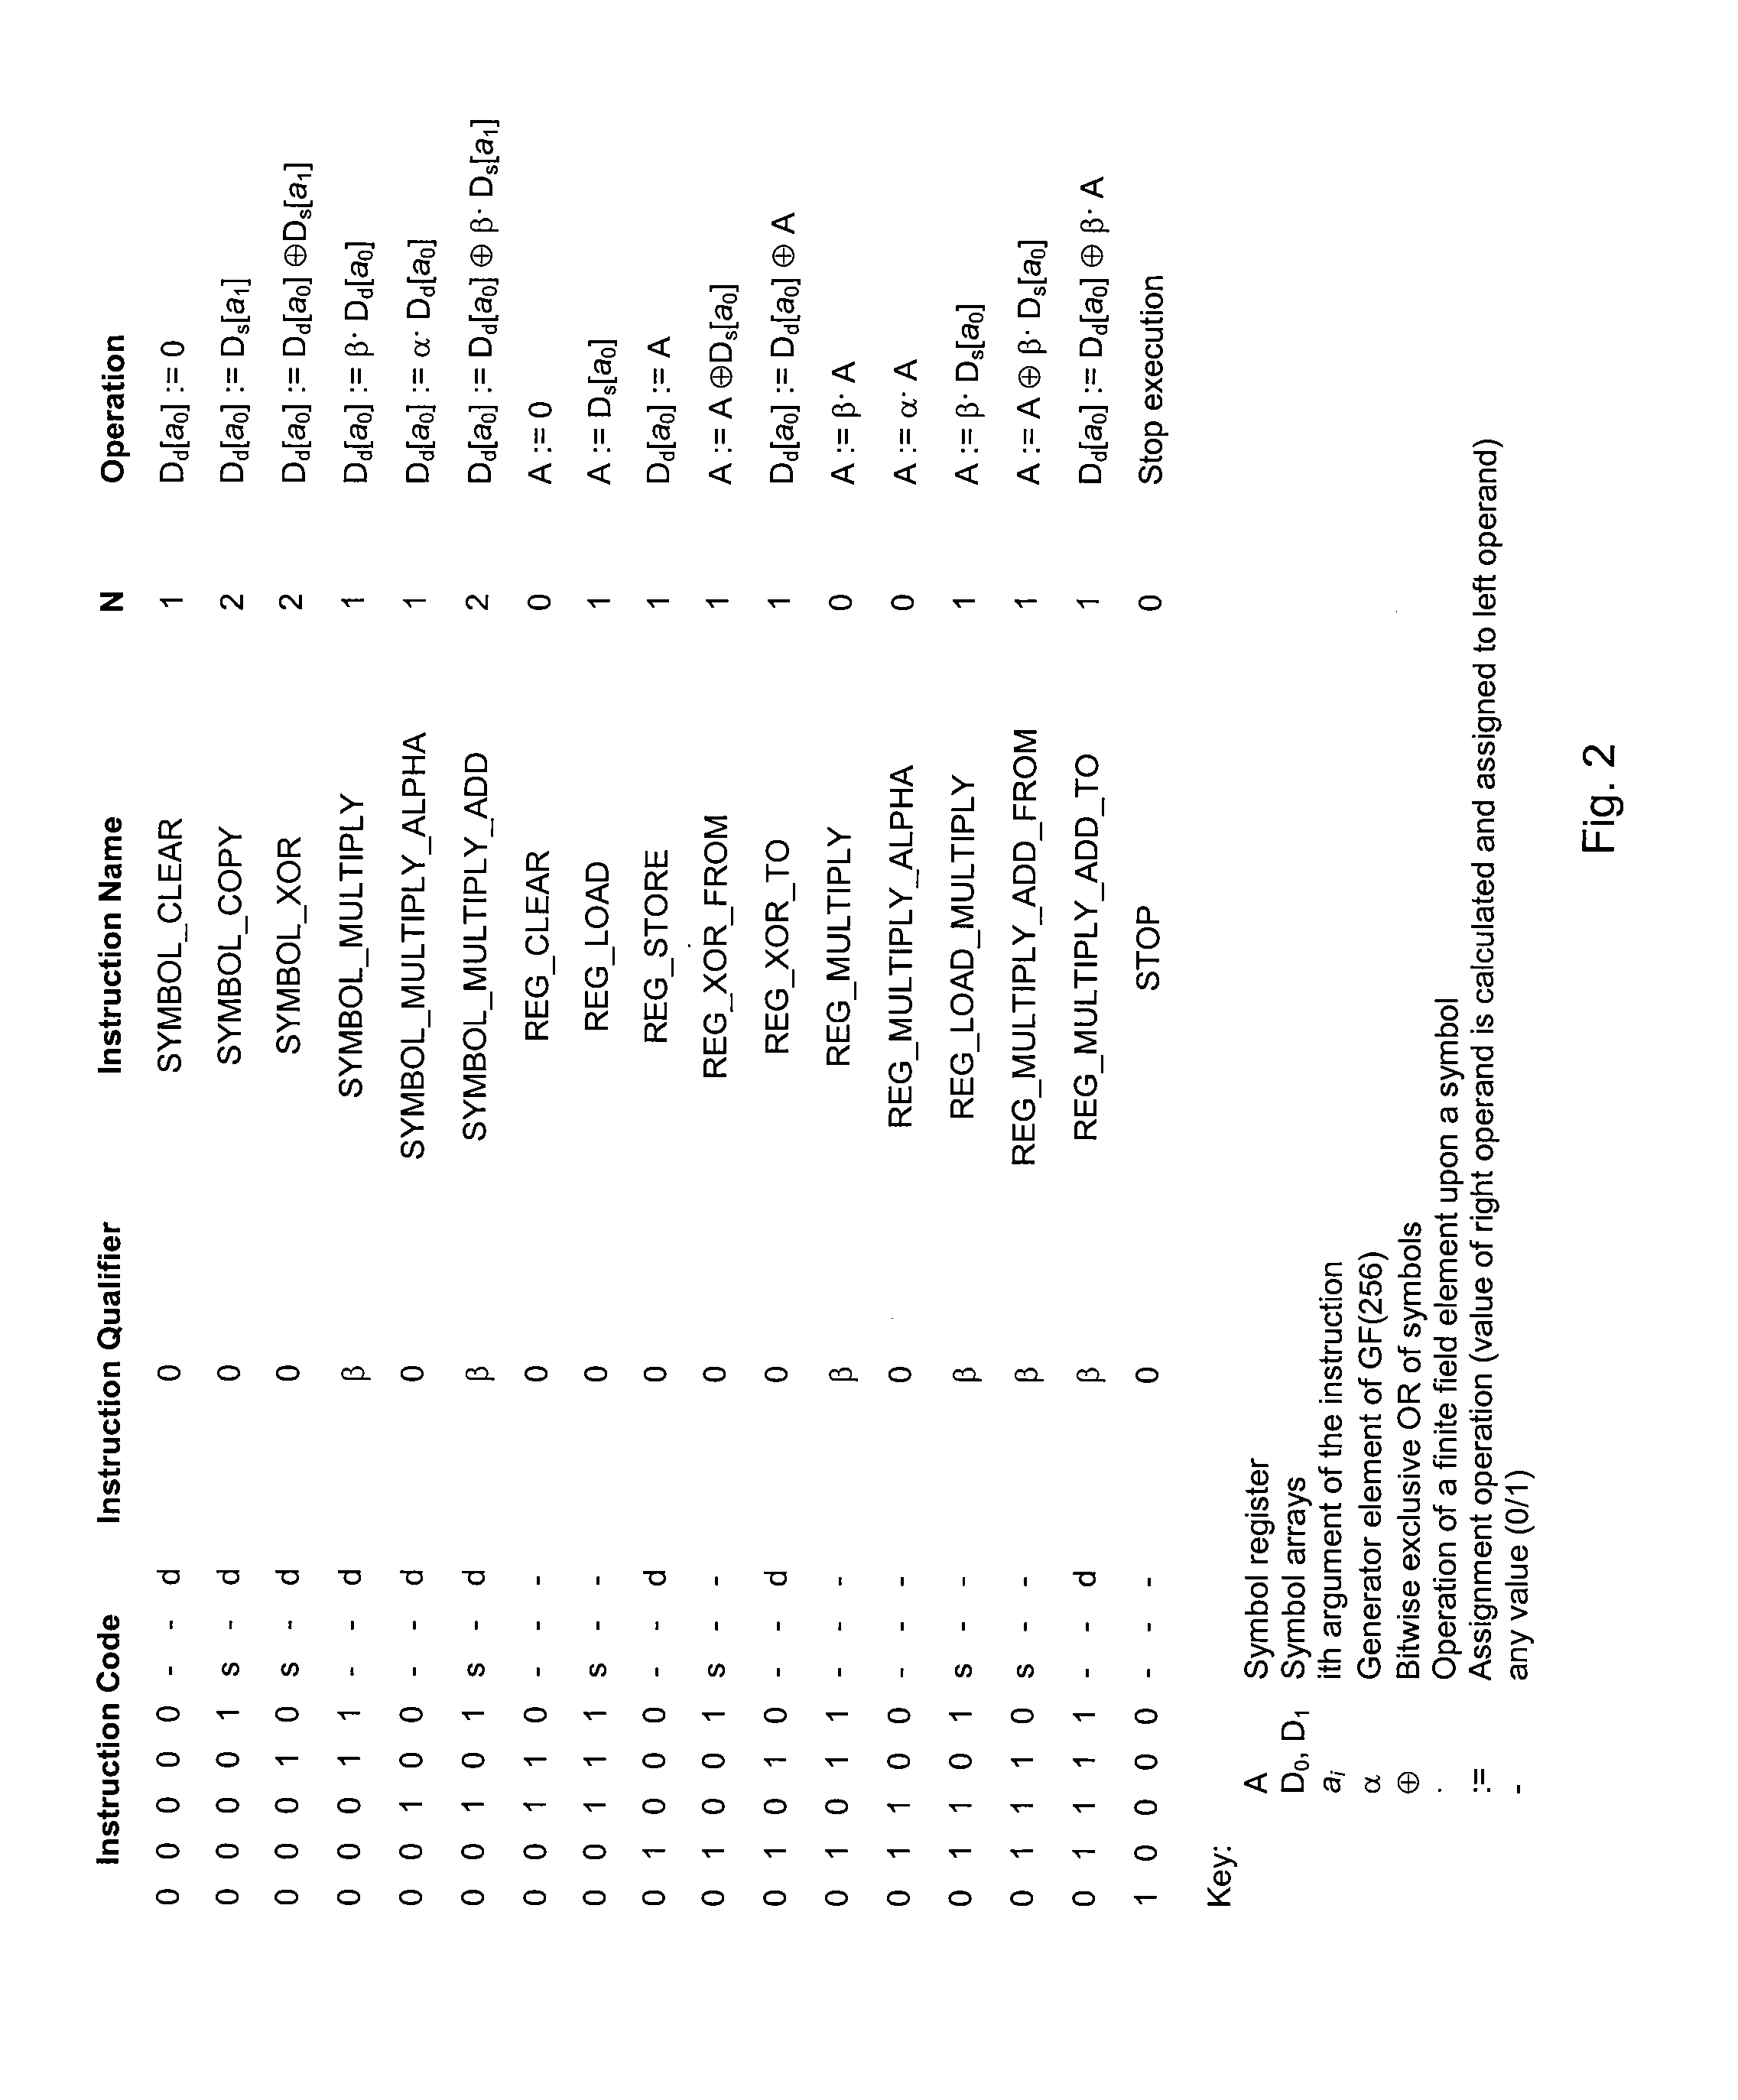 Efficient Encoding and Decoding Methods for Representing Schedules and Processing Forward Error Correction Codes